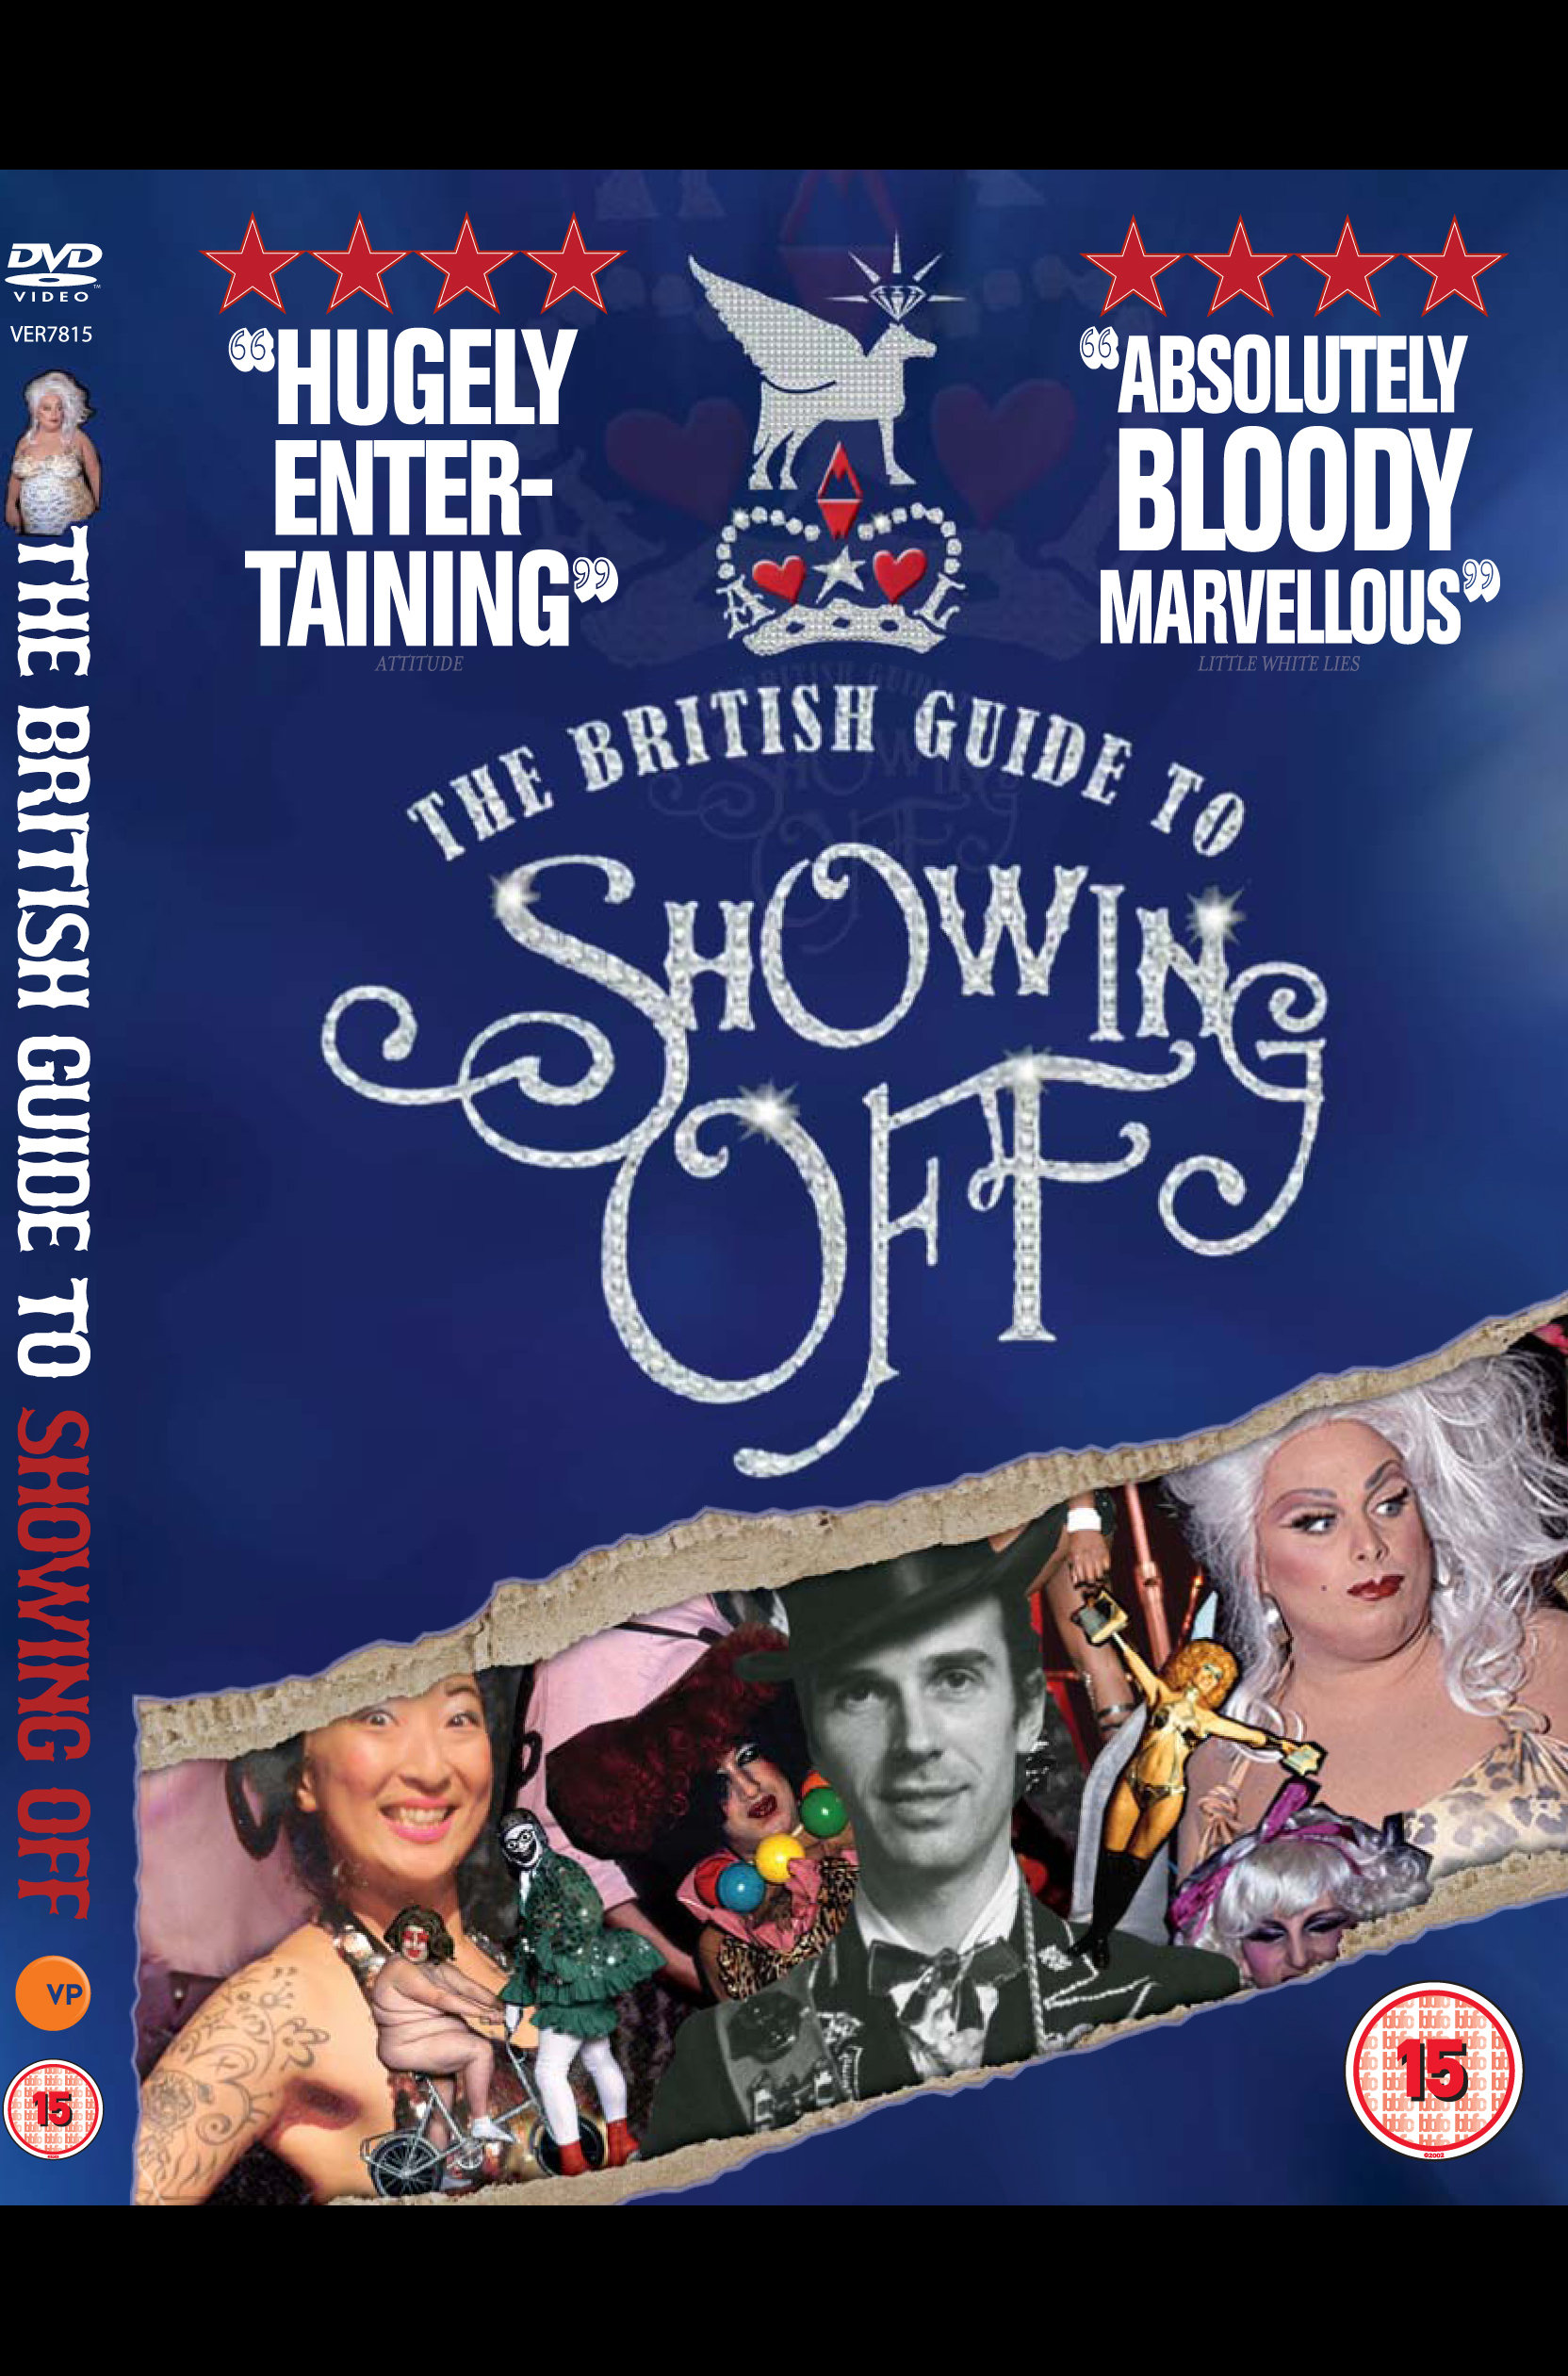 The British Guide to Showing Off (2011) Screenshot 1